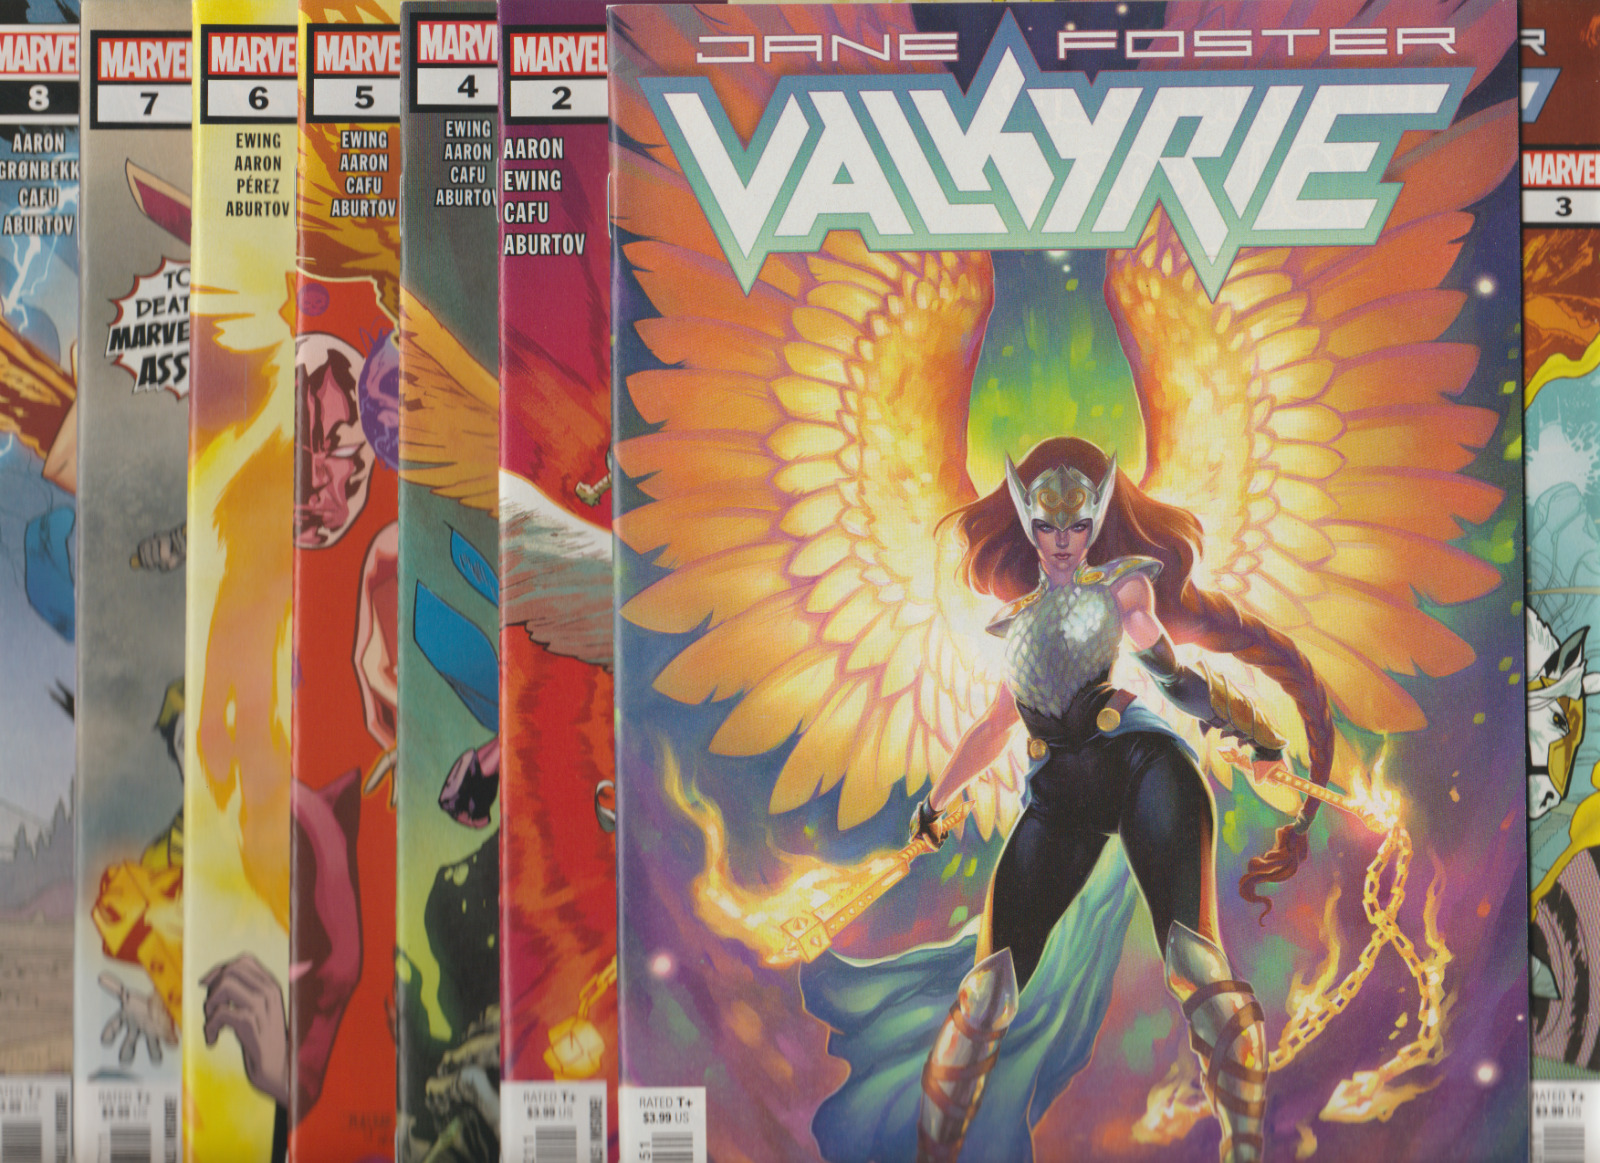 VALKYRIE JANE FOSTER #1 2 3 4 5 6 7 8 (2019) LOT VARIANT SOLO SERIES W/ 1ST APP